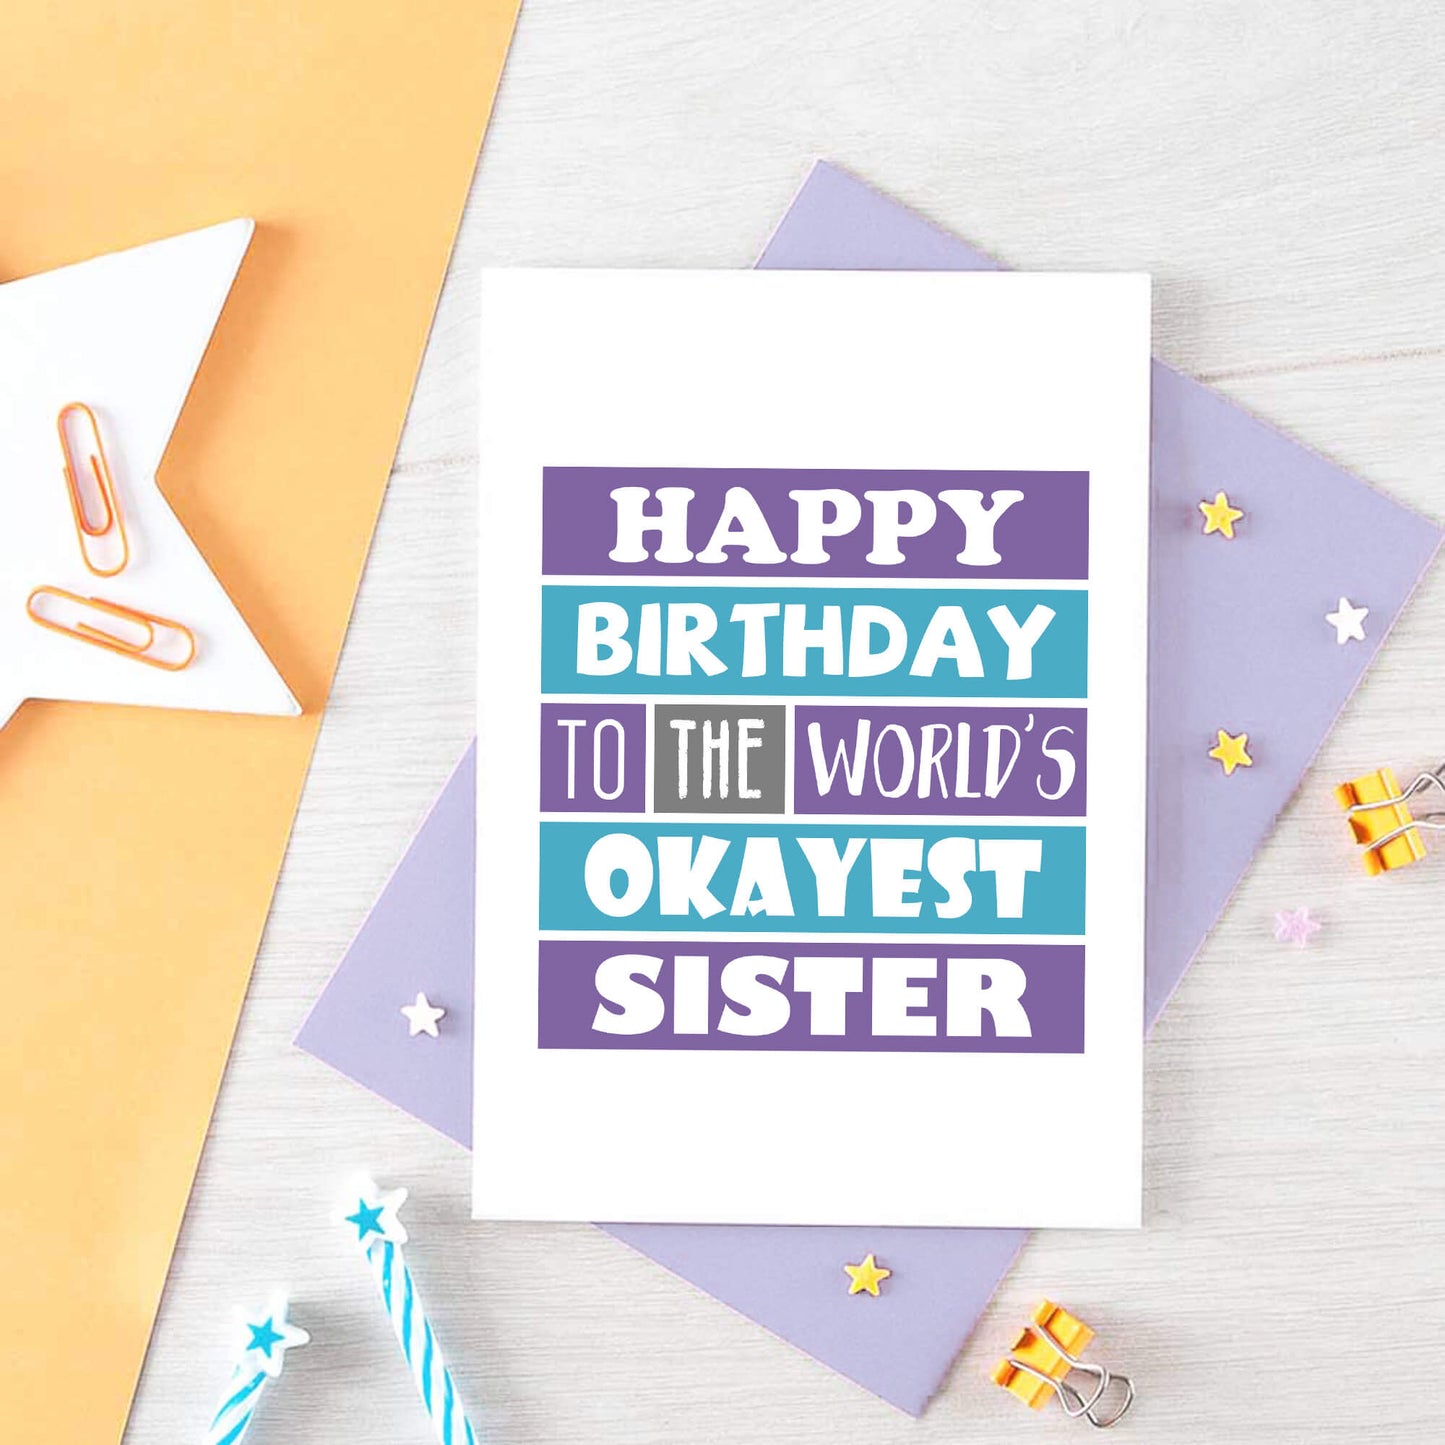 Sister Birthday Card by SixElevenCreations. Reads Happy birthday to the world's okayest sister. Product Code SE0168A6